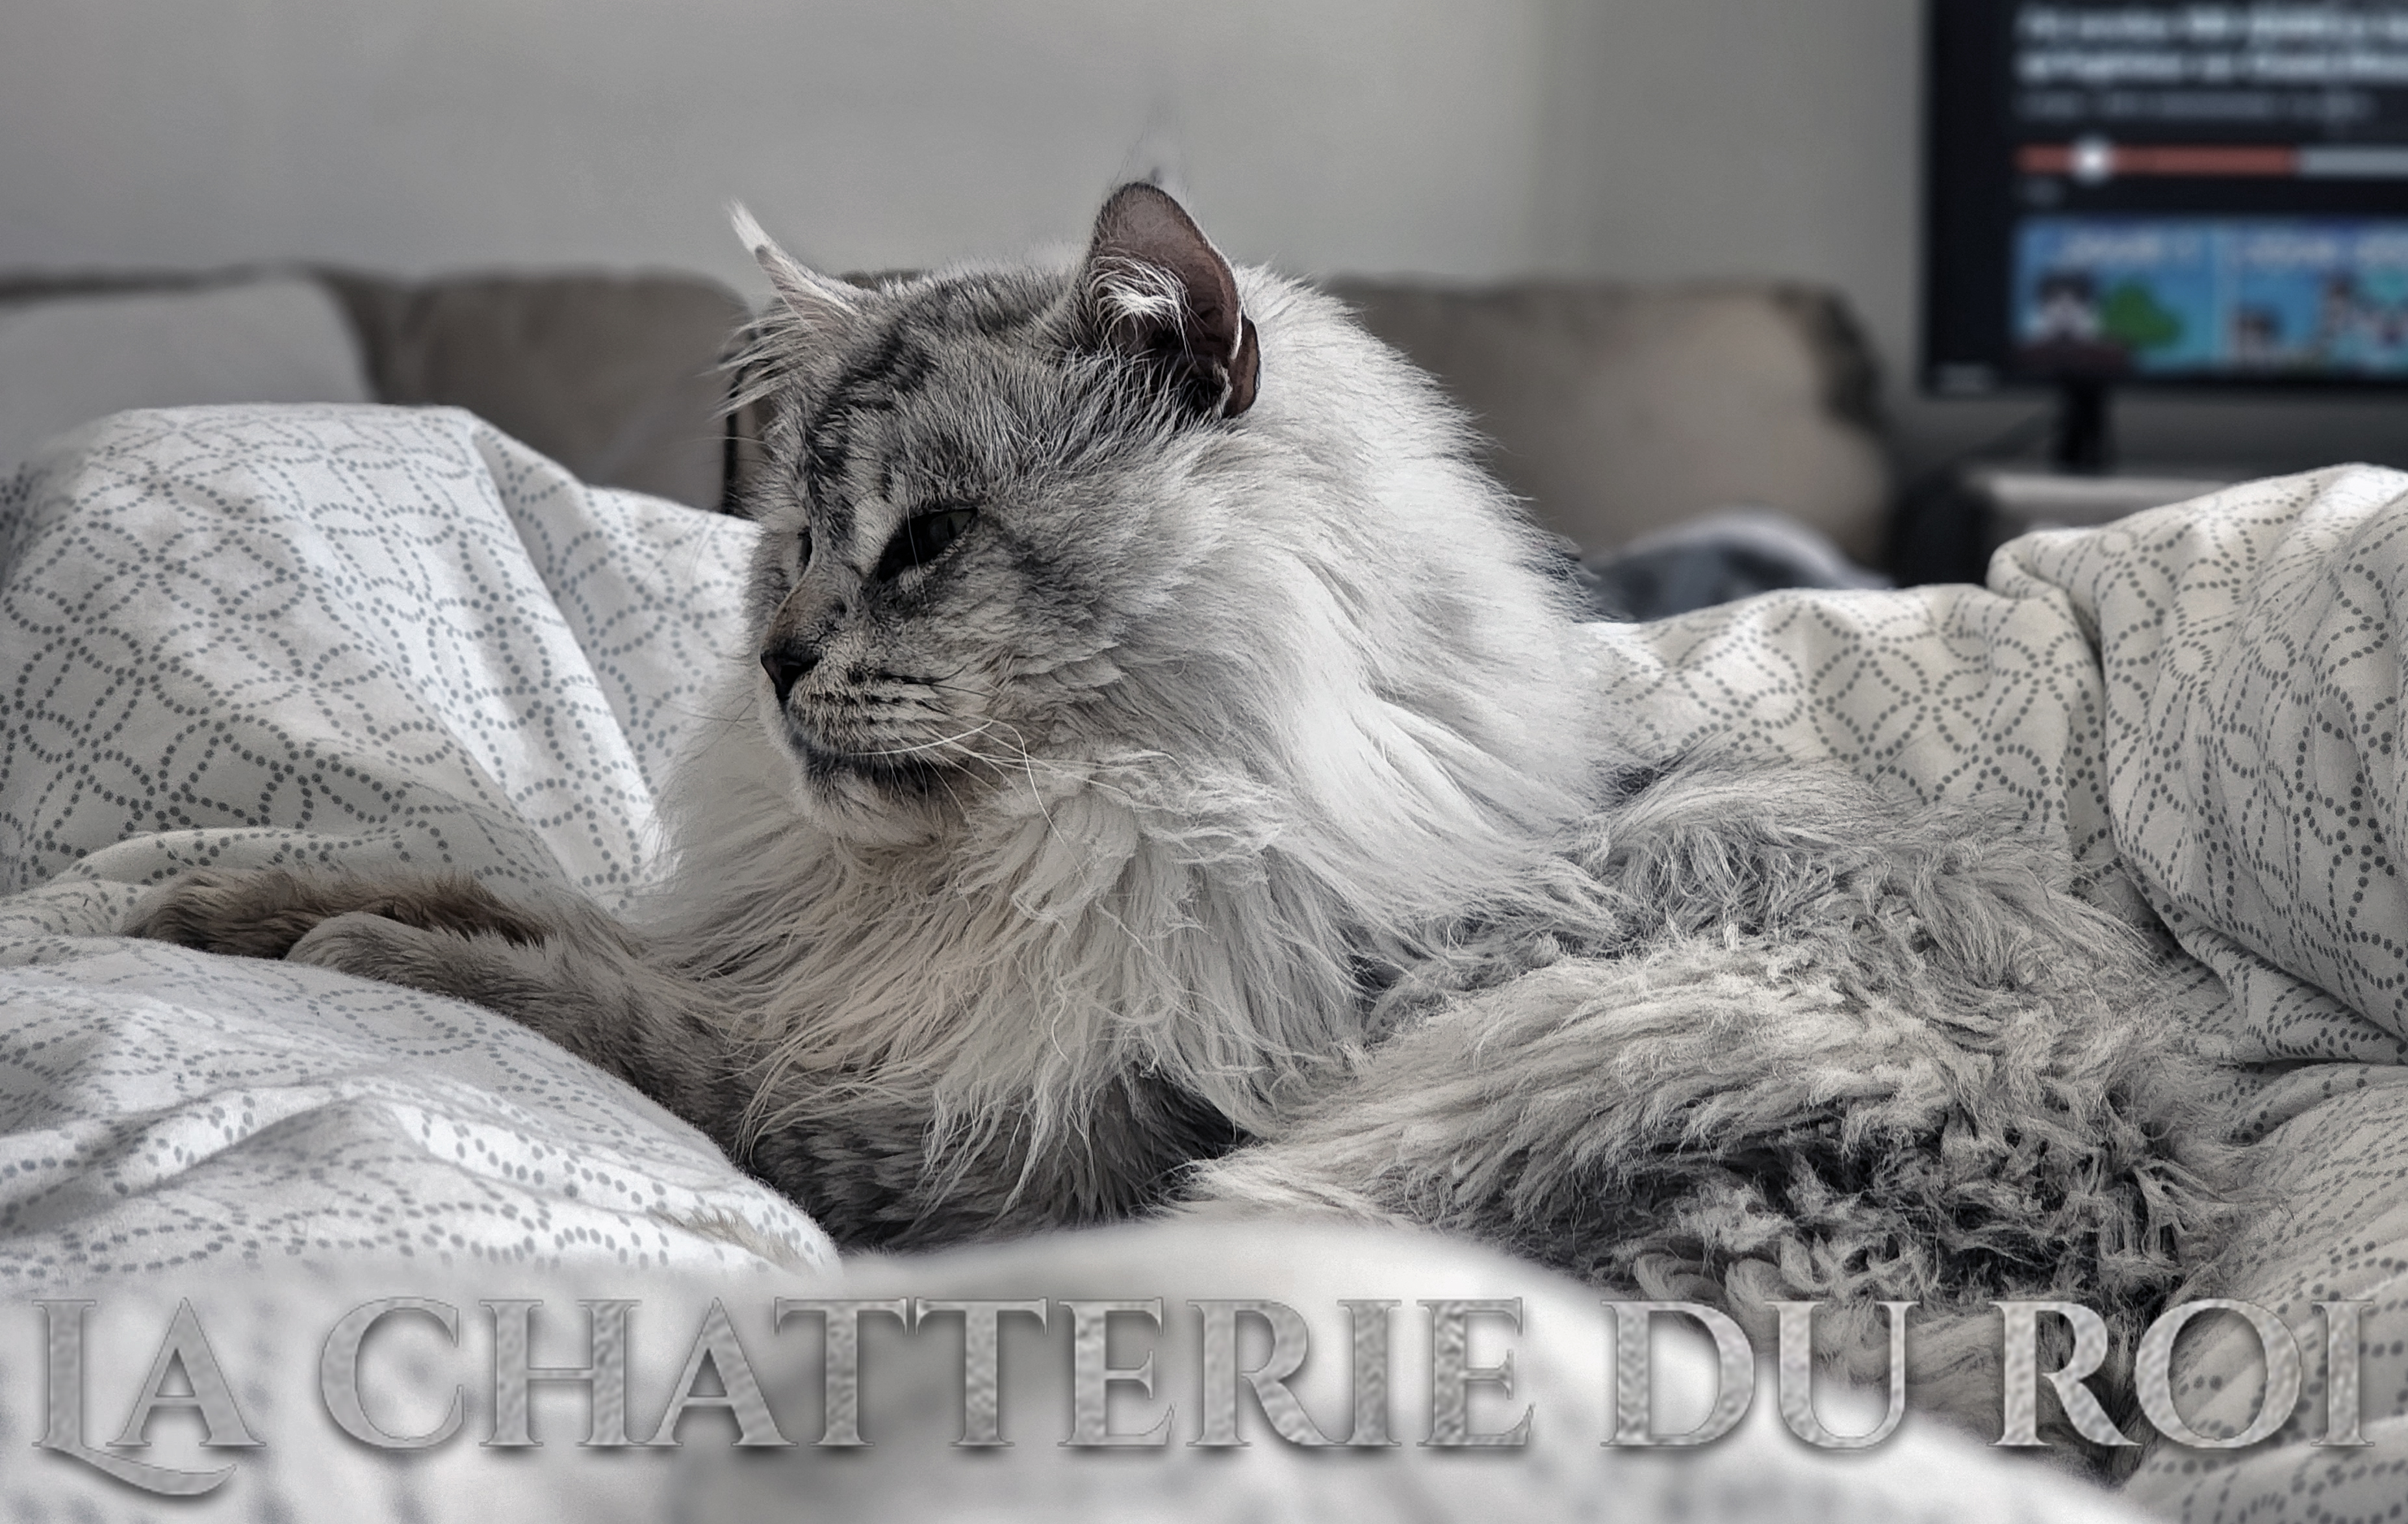 MAINE COON CHATTERIE DU ROI MAINE COON